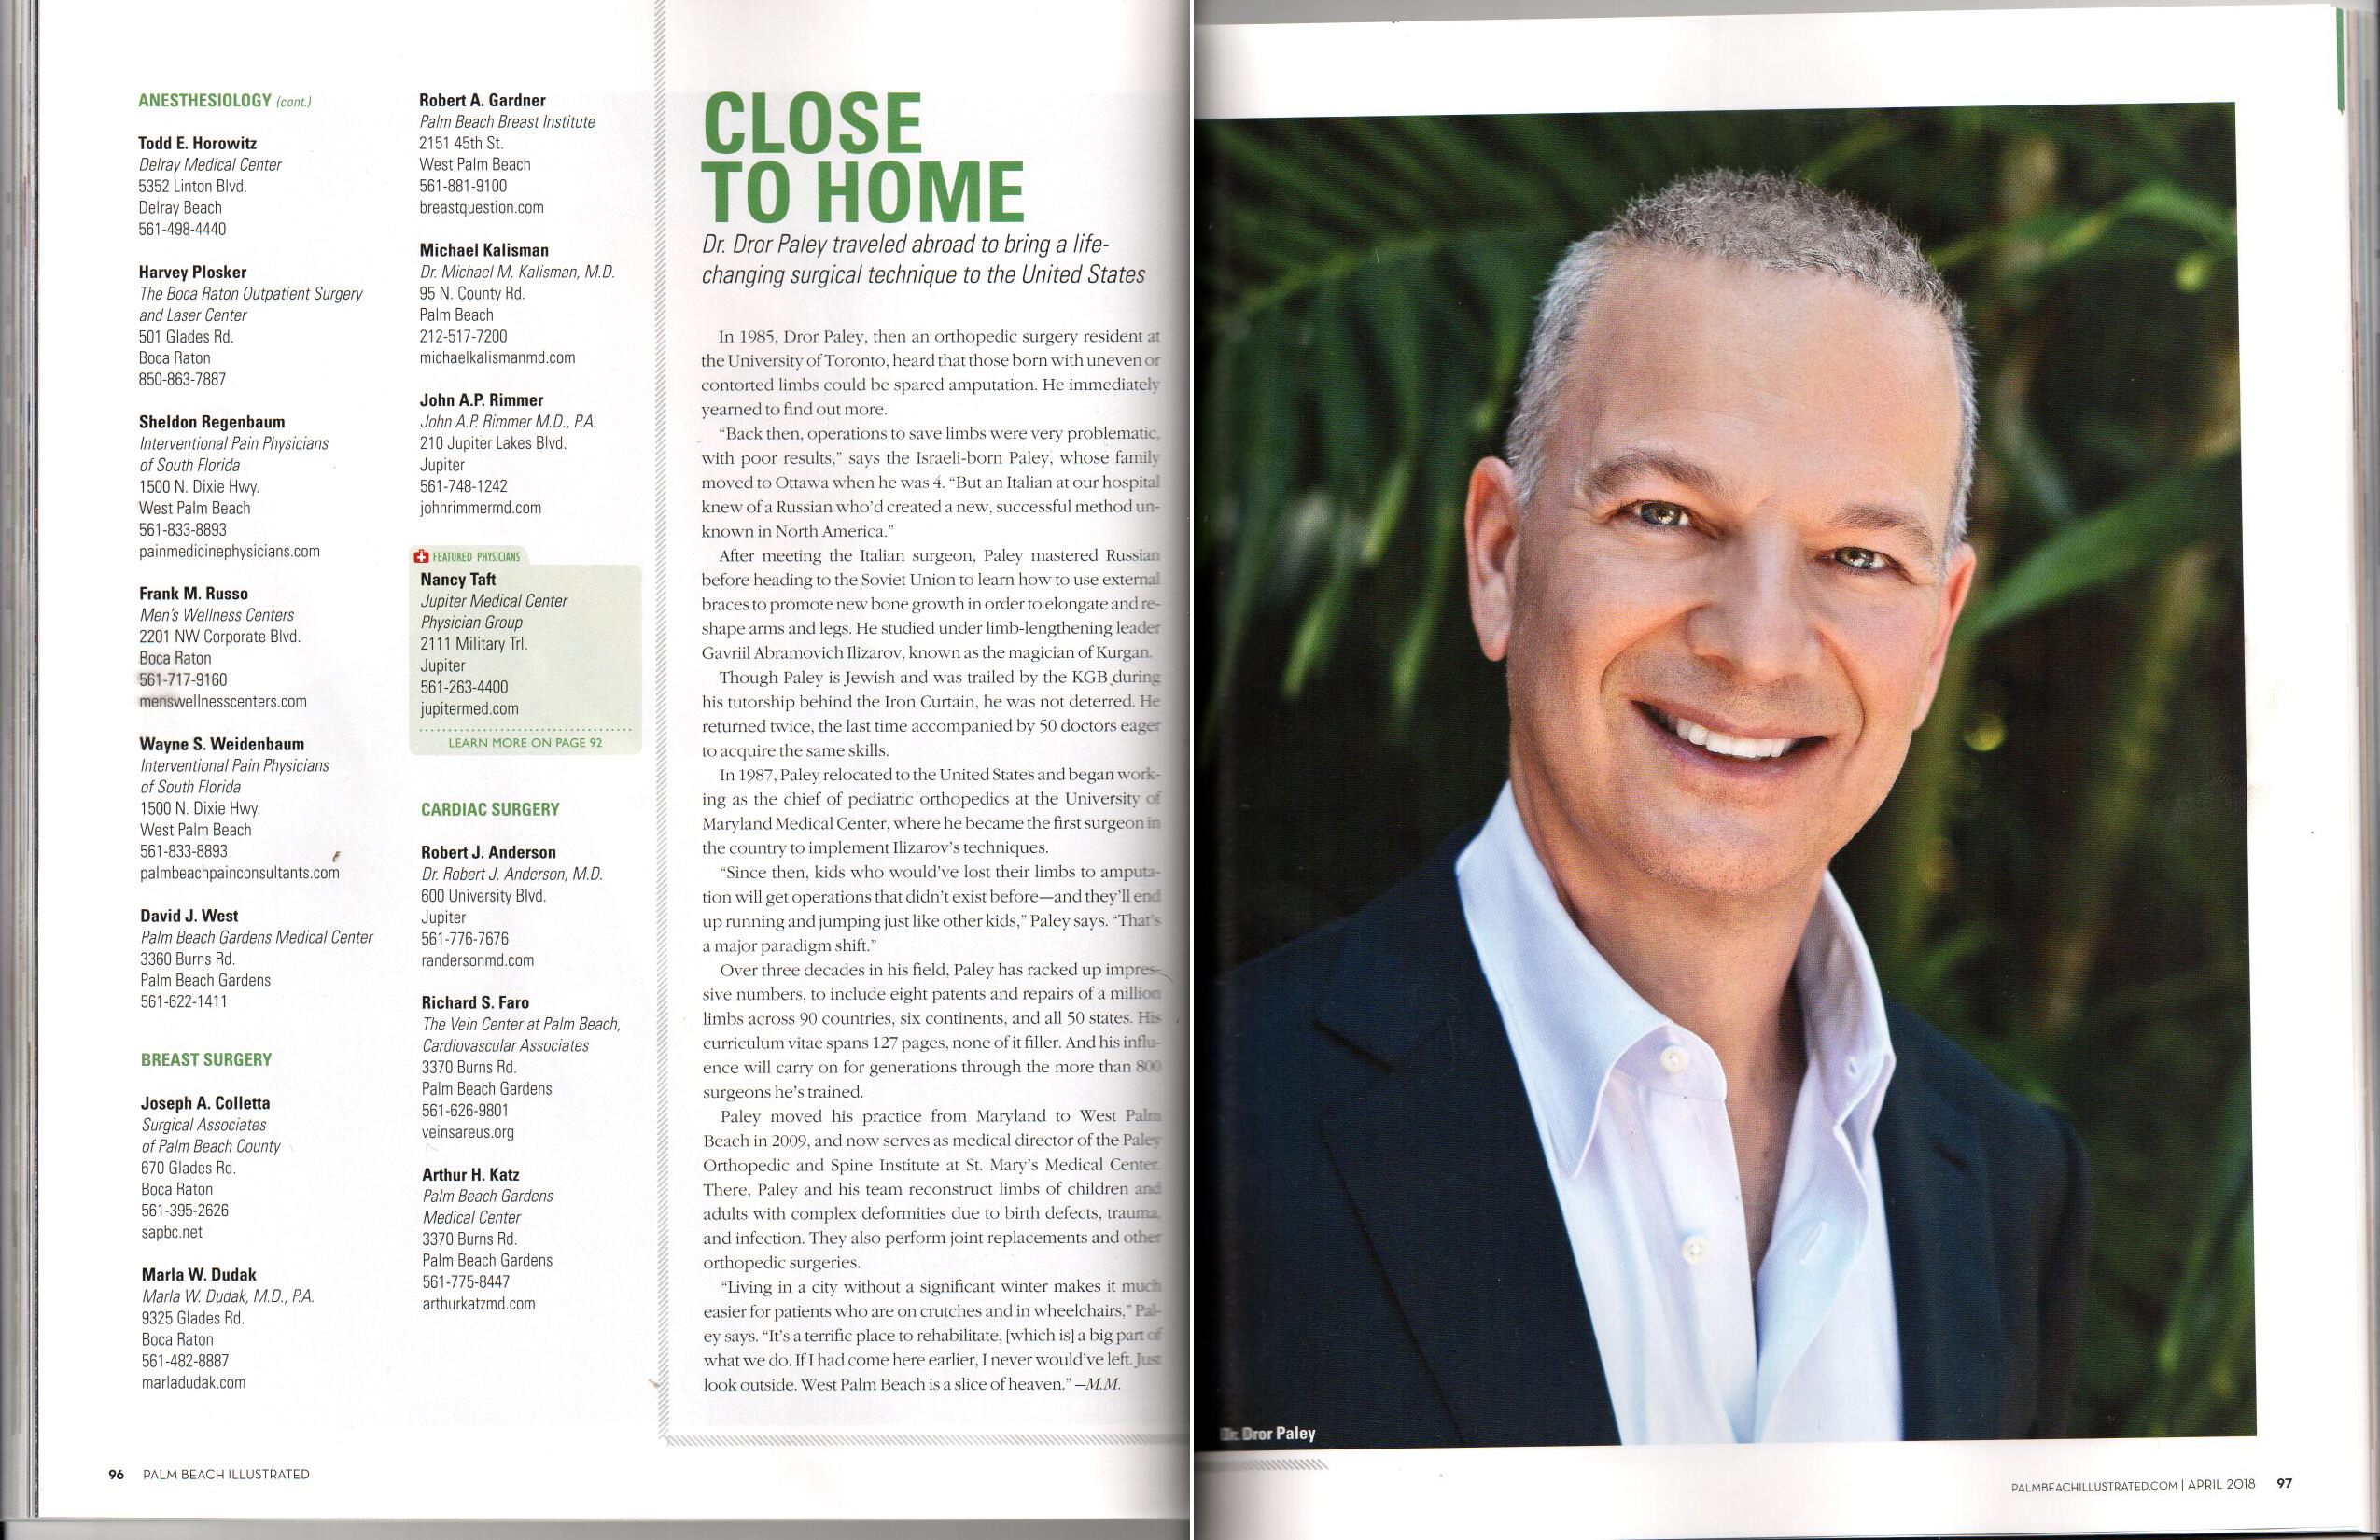 Dr. Paley on the Palm Beach Illustrated